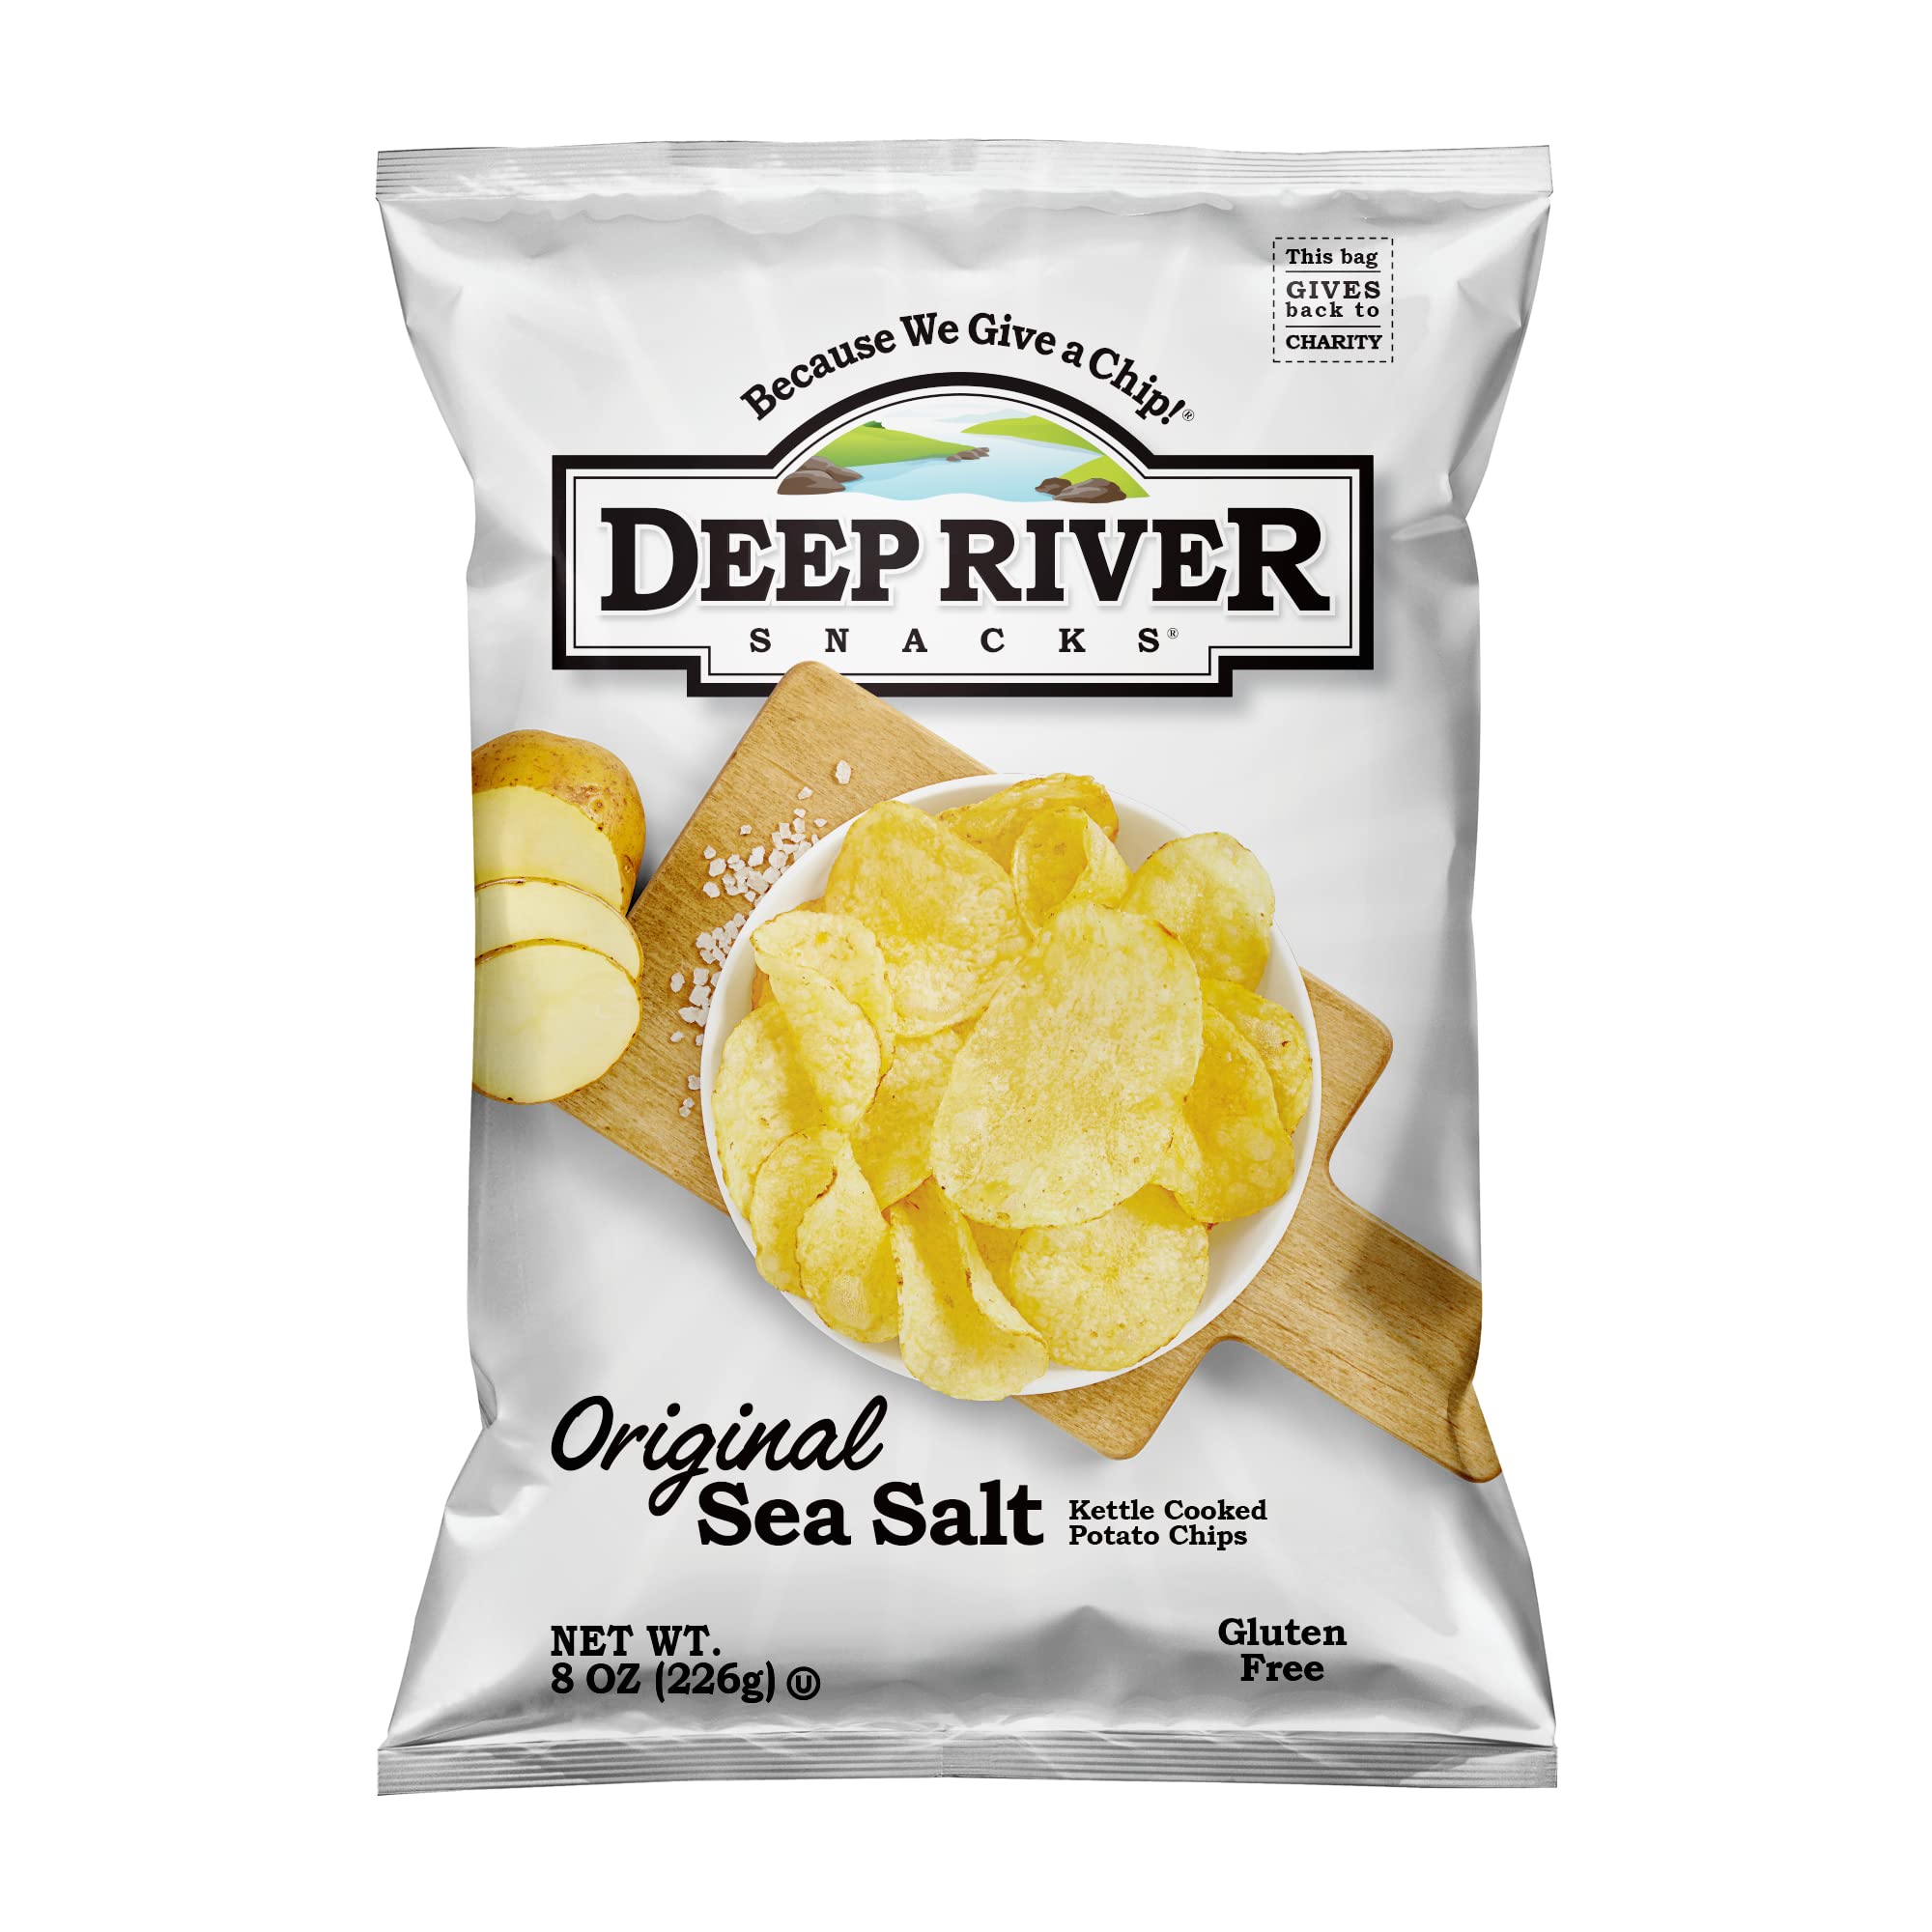 Deep River Snacks Original Sea Salt Kettle Cooked Potato Chips, 8 Ounce (Pack of 12) $26.70 Amazon